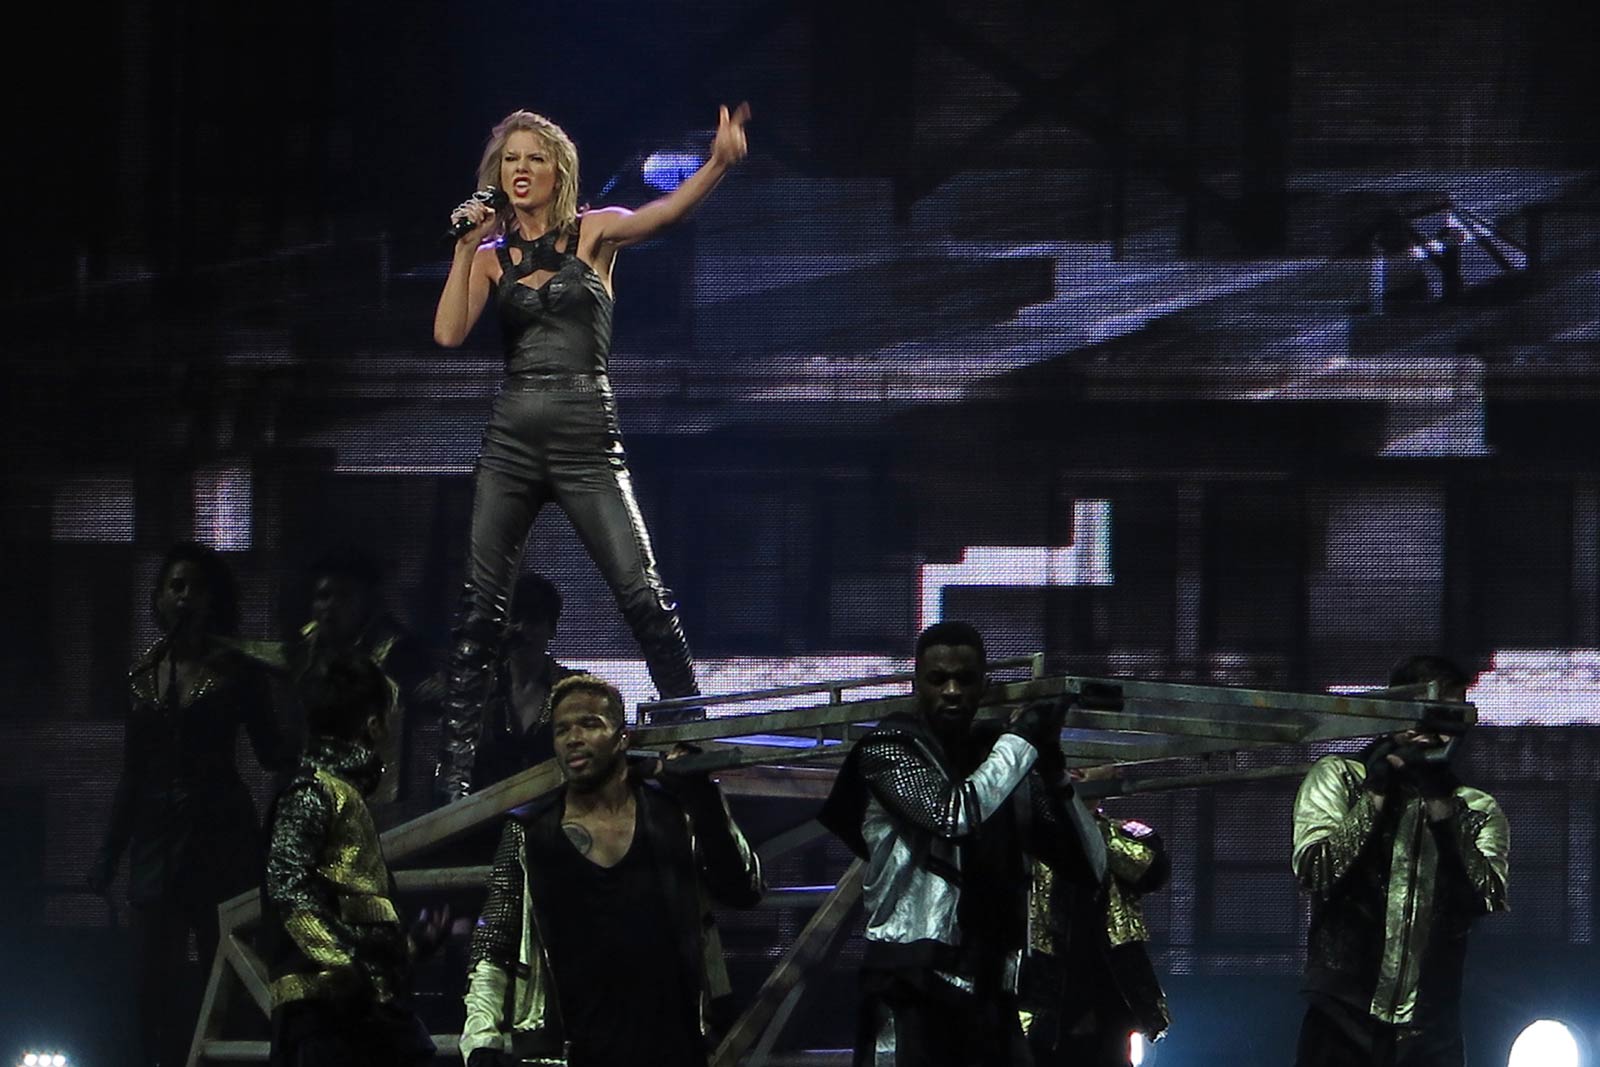 Taylor Swift performs at 1989 World Tour Concert